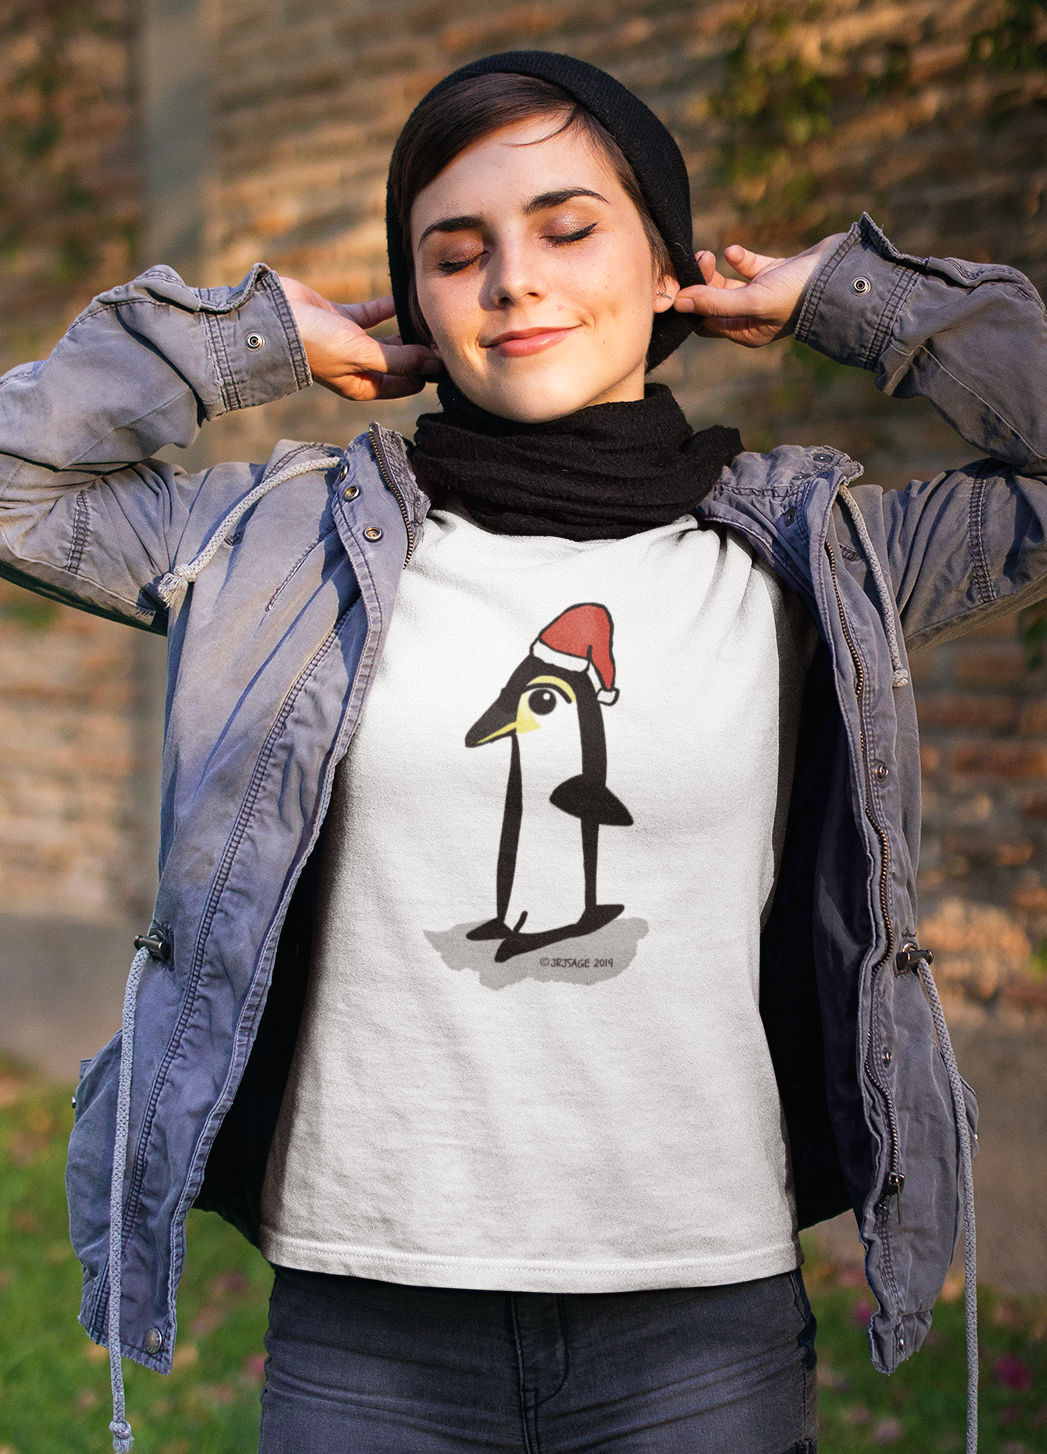 Young woman outside wearing a Santa Penguin cute Christmas T-shirt illustrated design by Hector and Bone on a white vegan cotton t-shirt